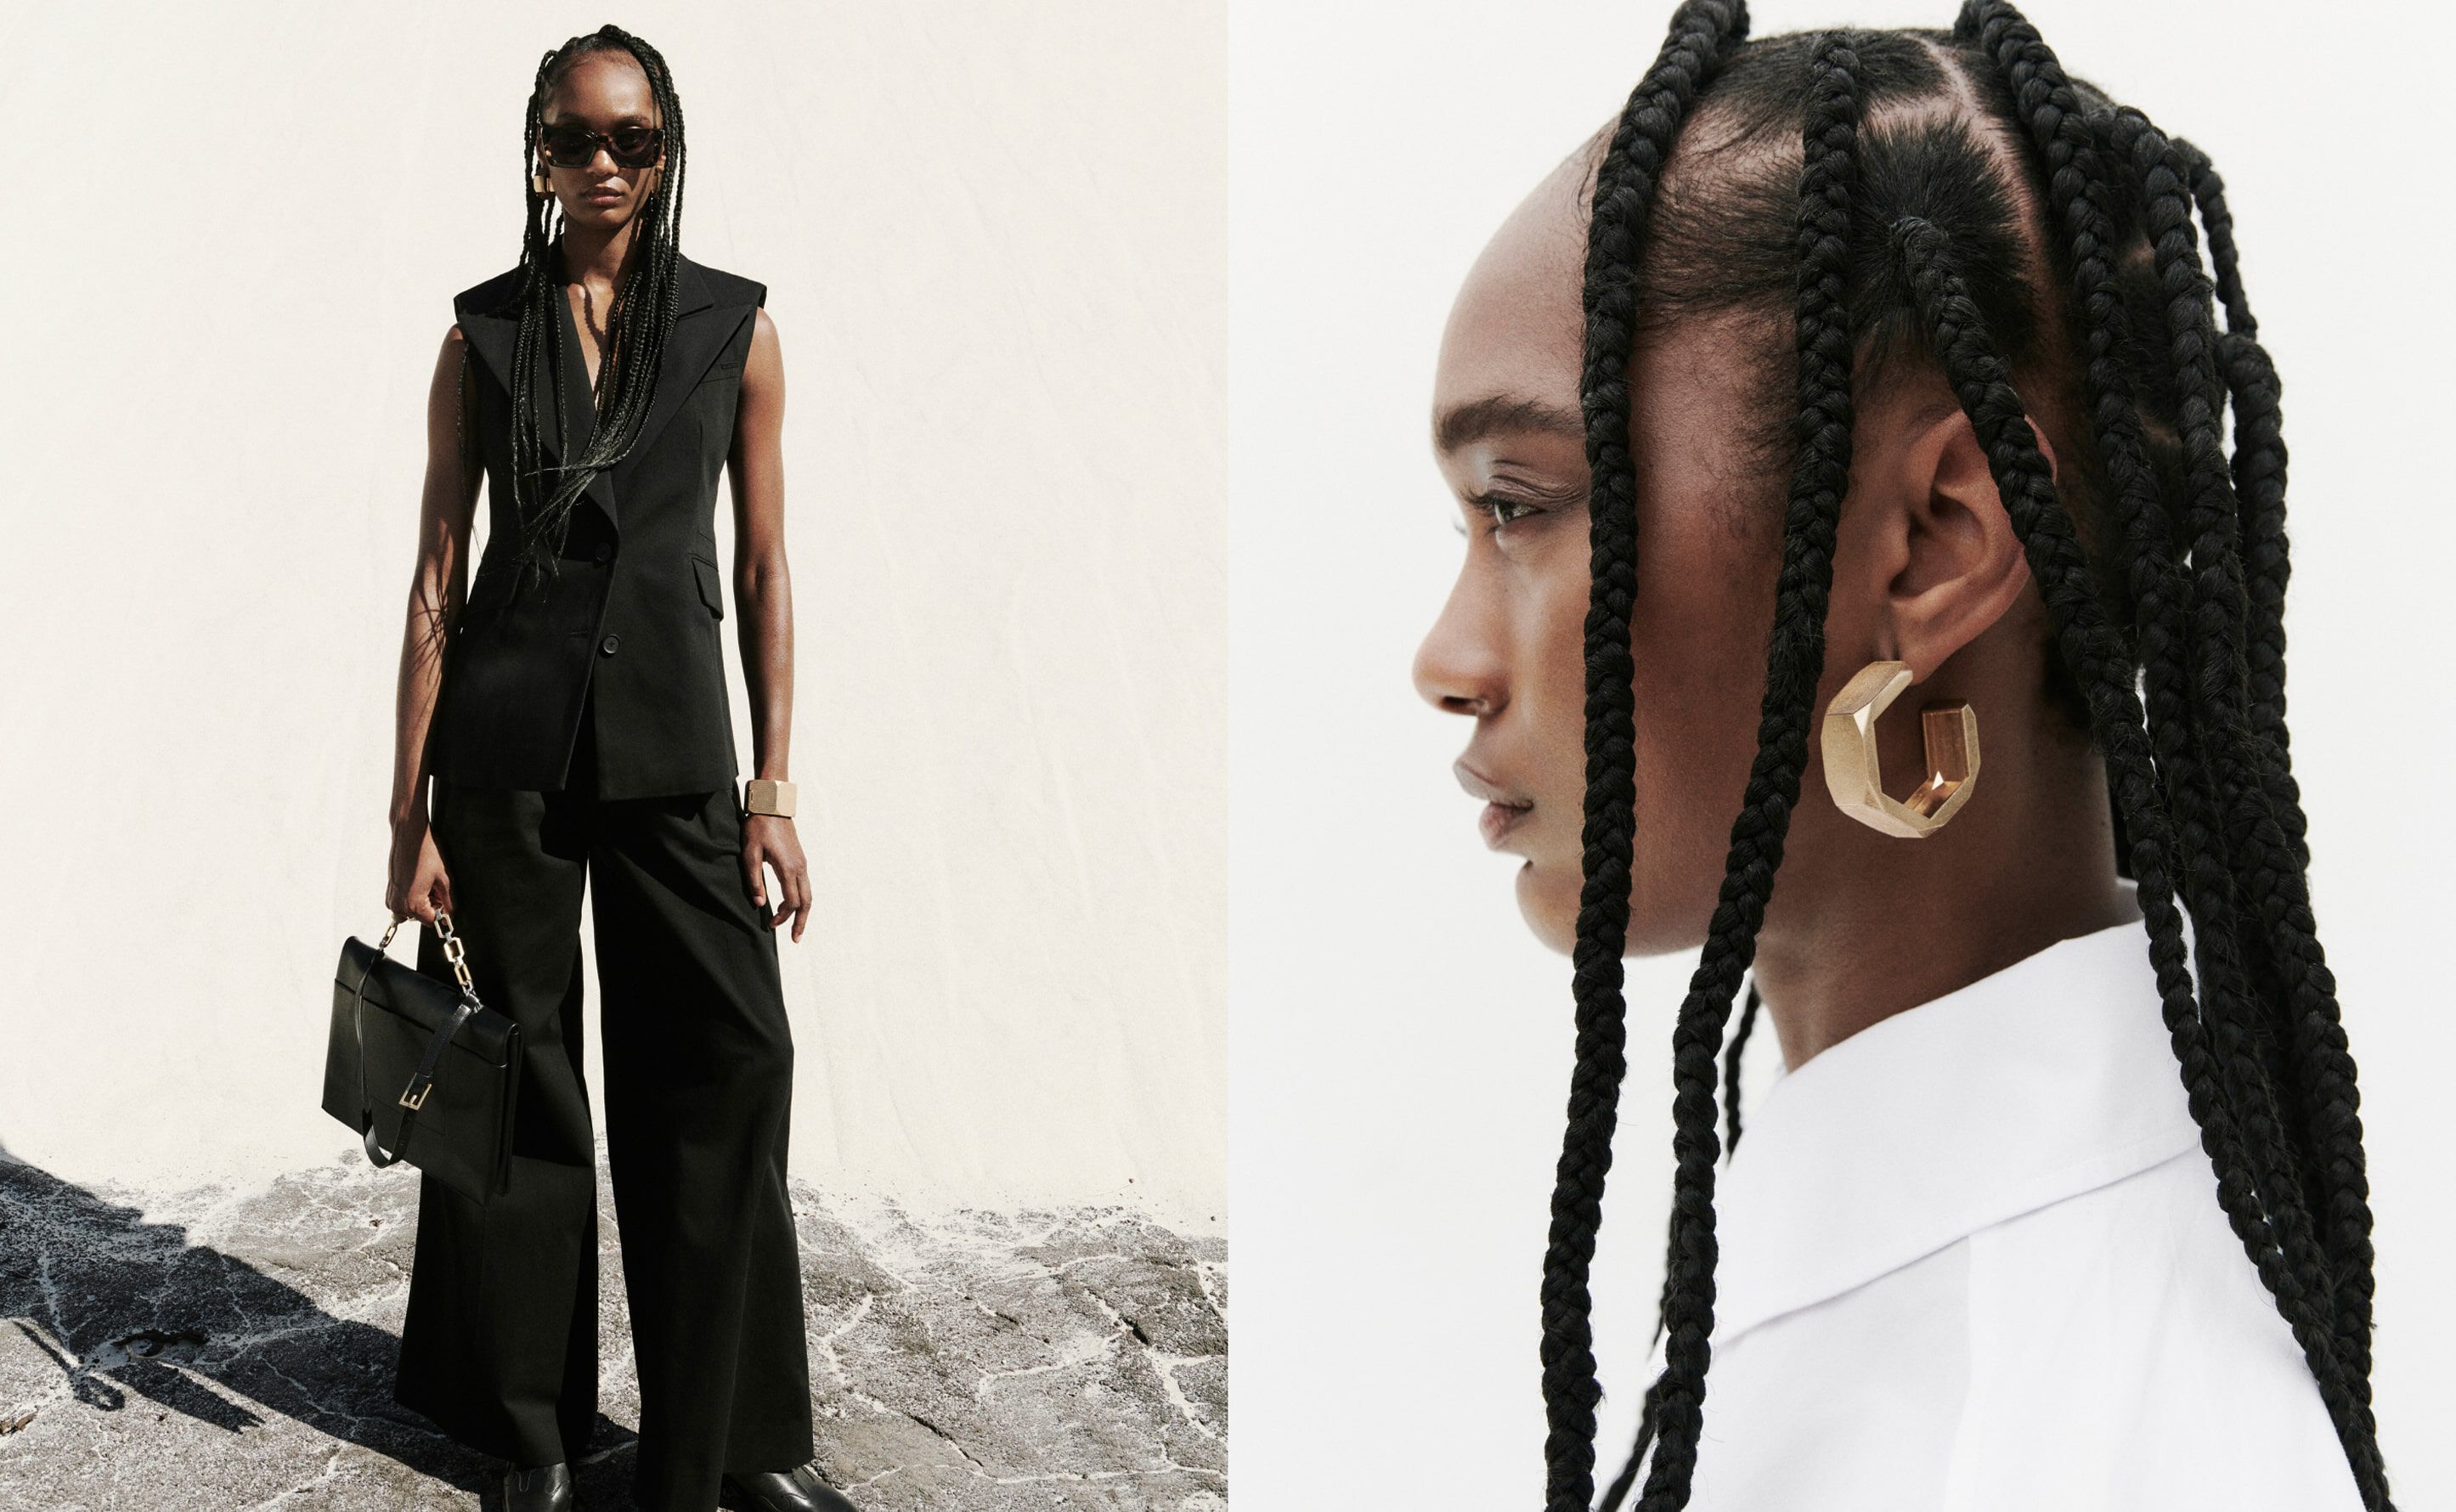 Collage of two photographs showing a woman wearing a black tailored suit with a sleeveless gilet and wide left trousers, and a profile photograph of a woman wearing braids.